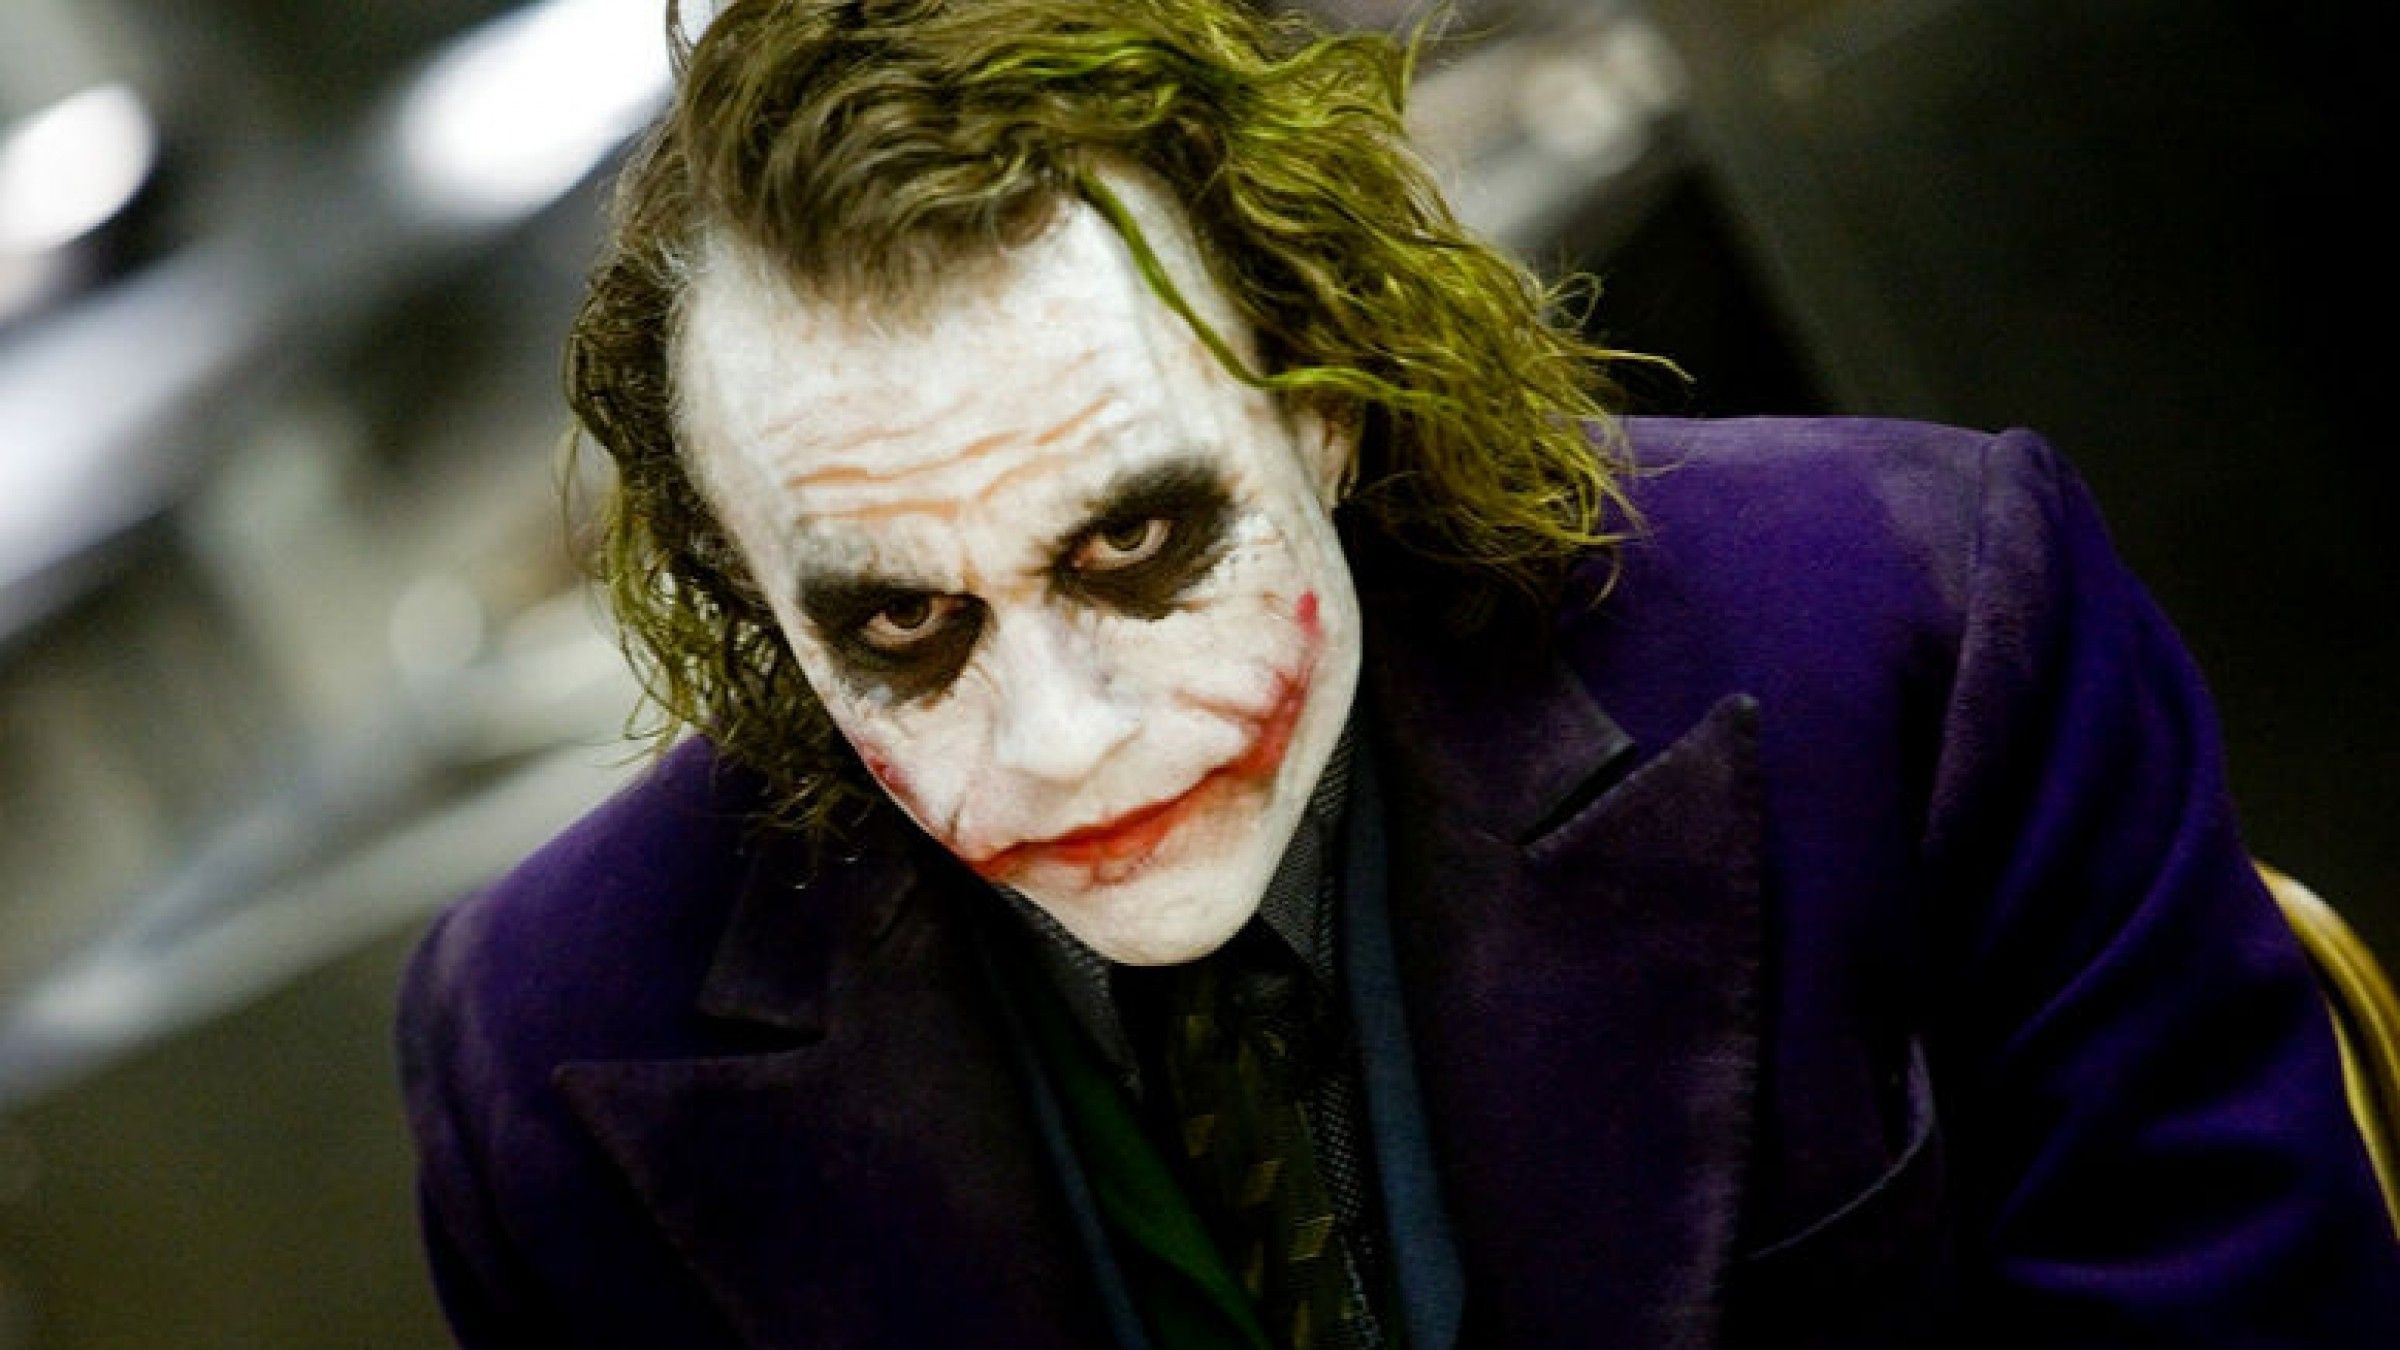 5 Tips on How Christopher Nolan Wrote the Joker and 'The Dark Knight'